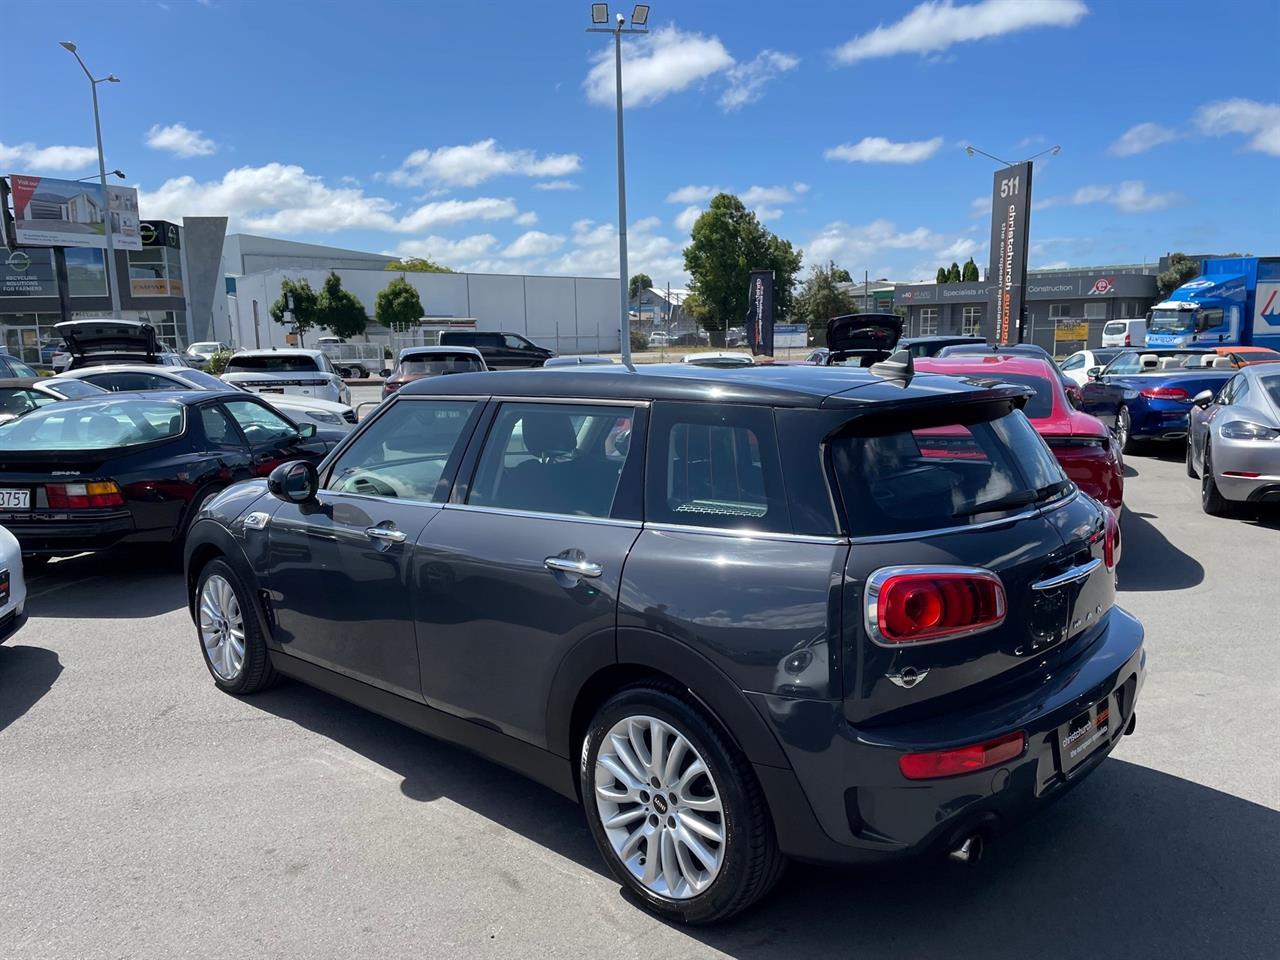 image-2, 2016 Mini Cooper S Clubman Facelift at Christchurch